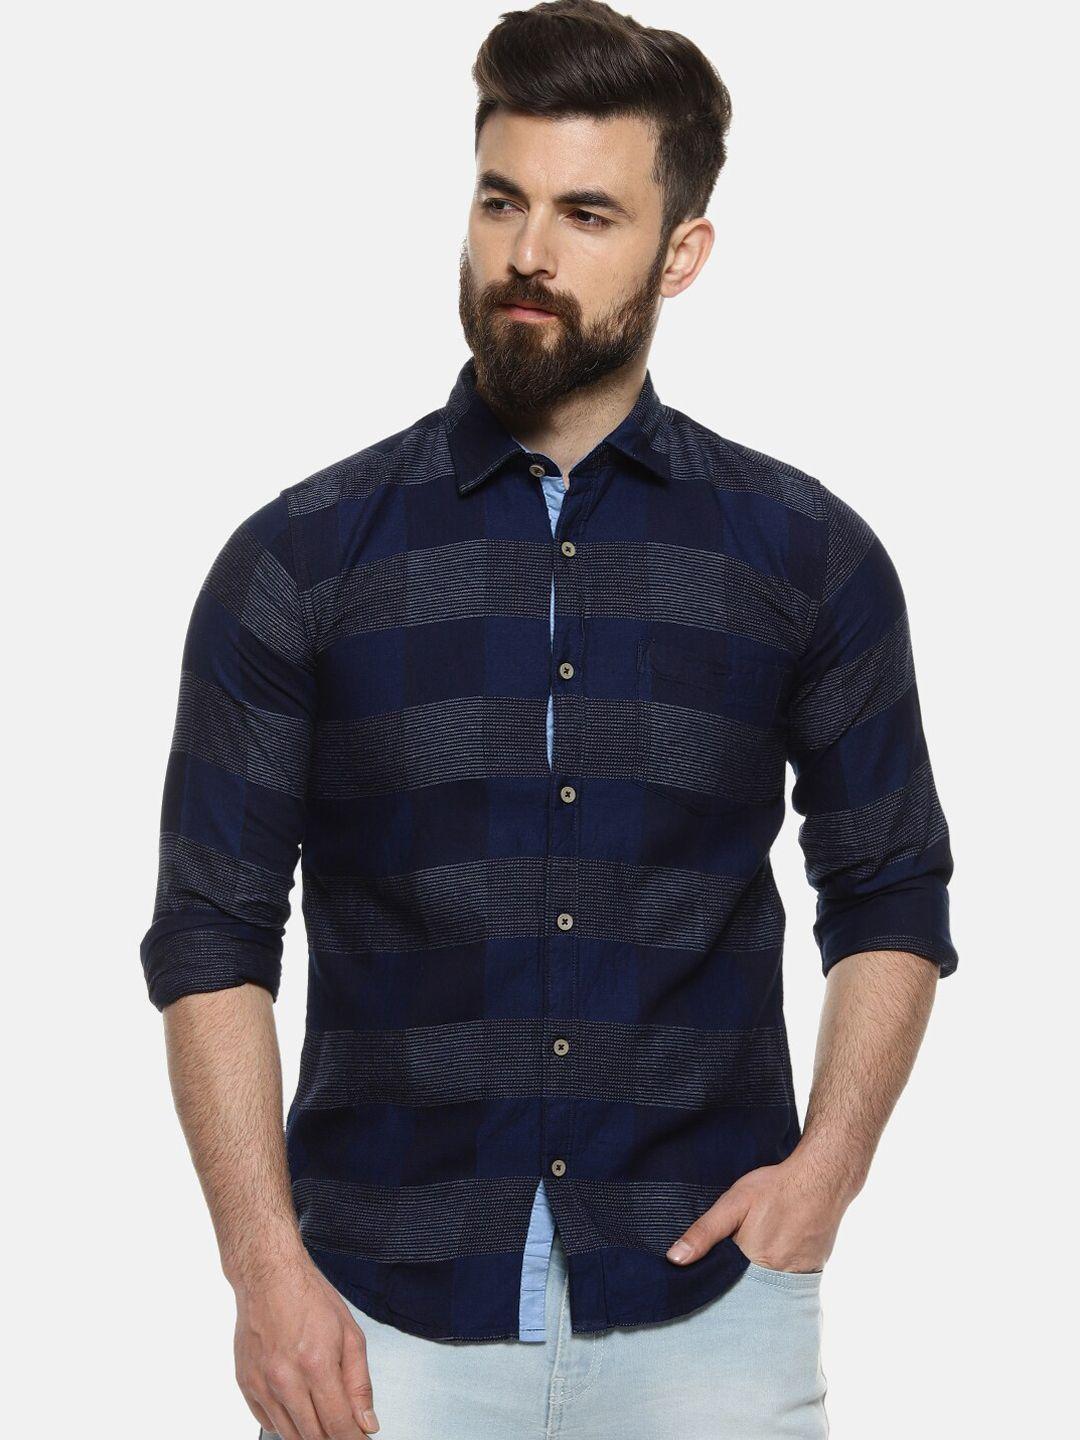 Campus Sutra Men Navy Blue & Grey Regular Fit Checked Casual Shirt